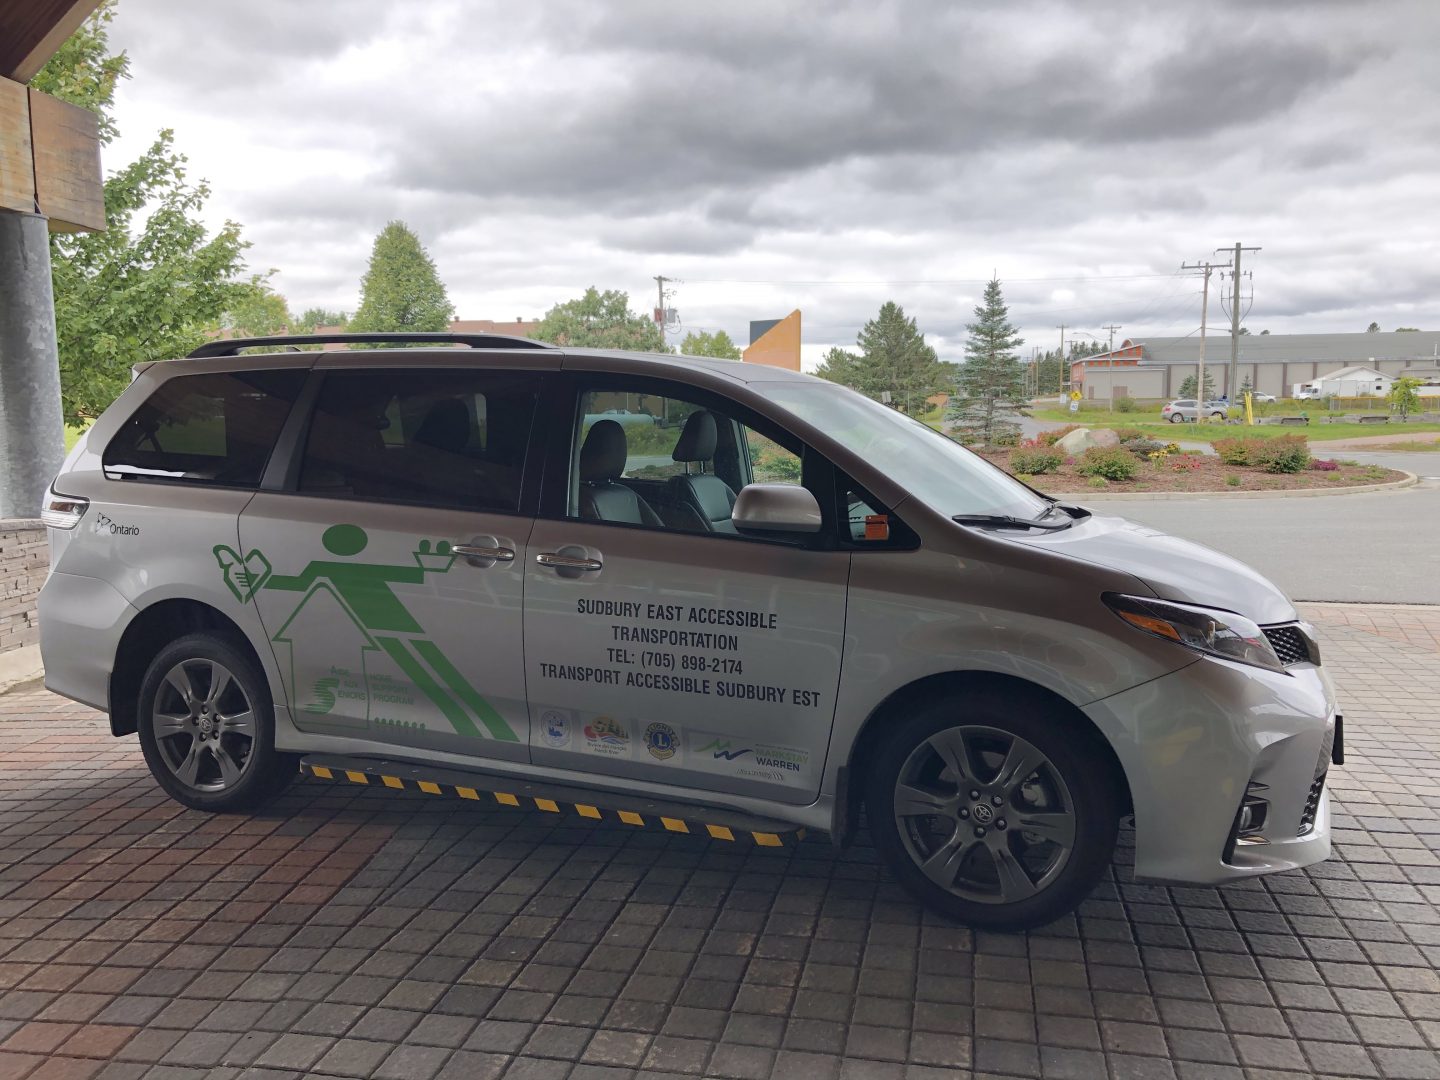 Side image of the minivan dedicated to the SEAT project, Transport Accessible Sudbury East.